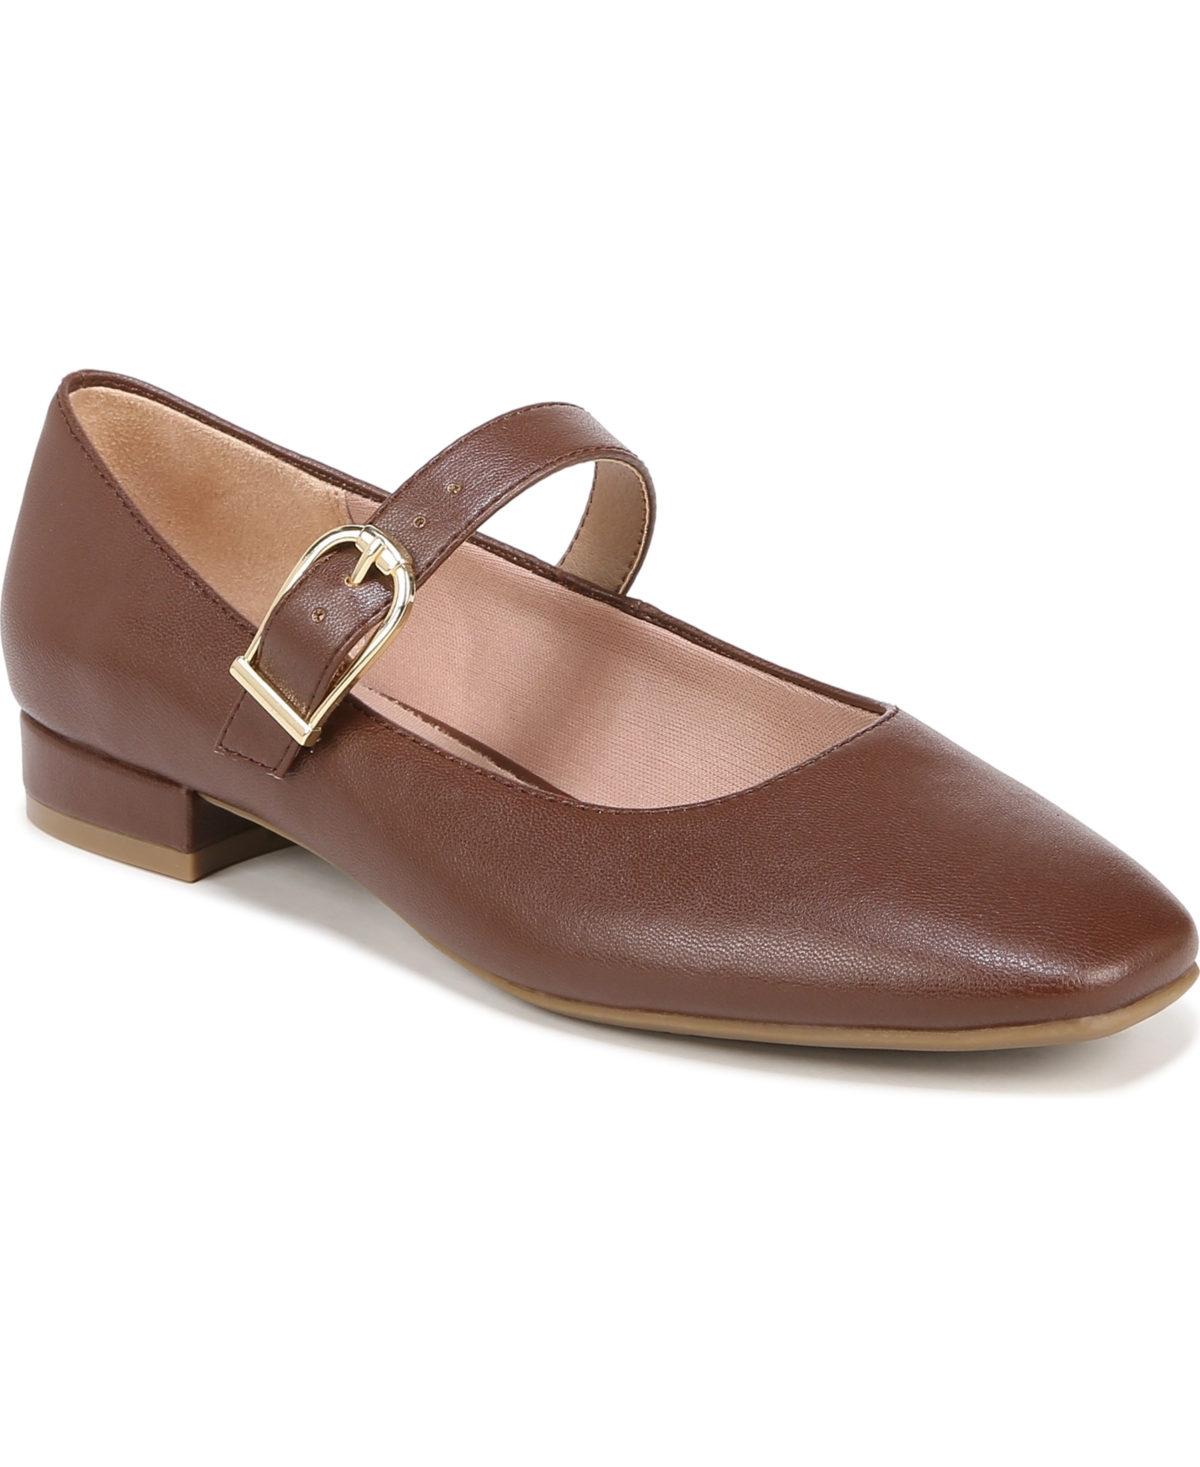 Women's Cameo Mary Jane Ballet Flats - Dark Tan Faux Leather